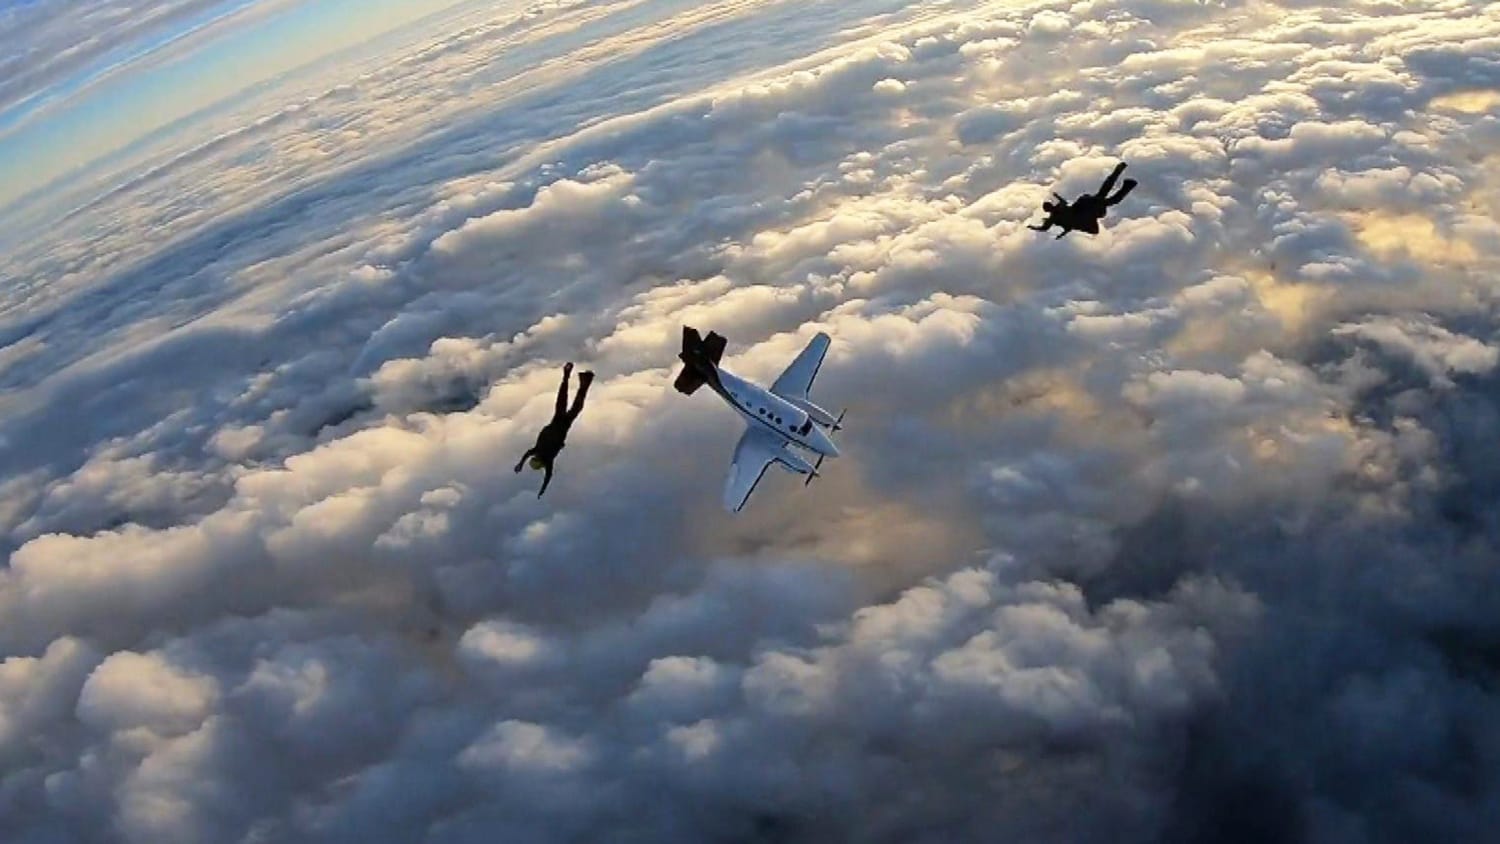 skydiving plane view